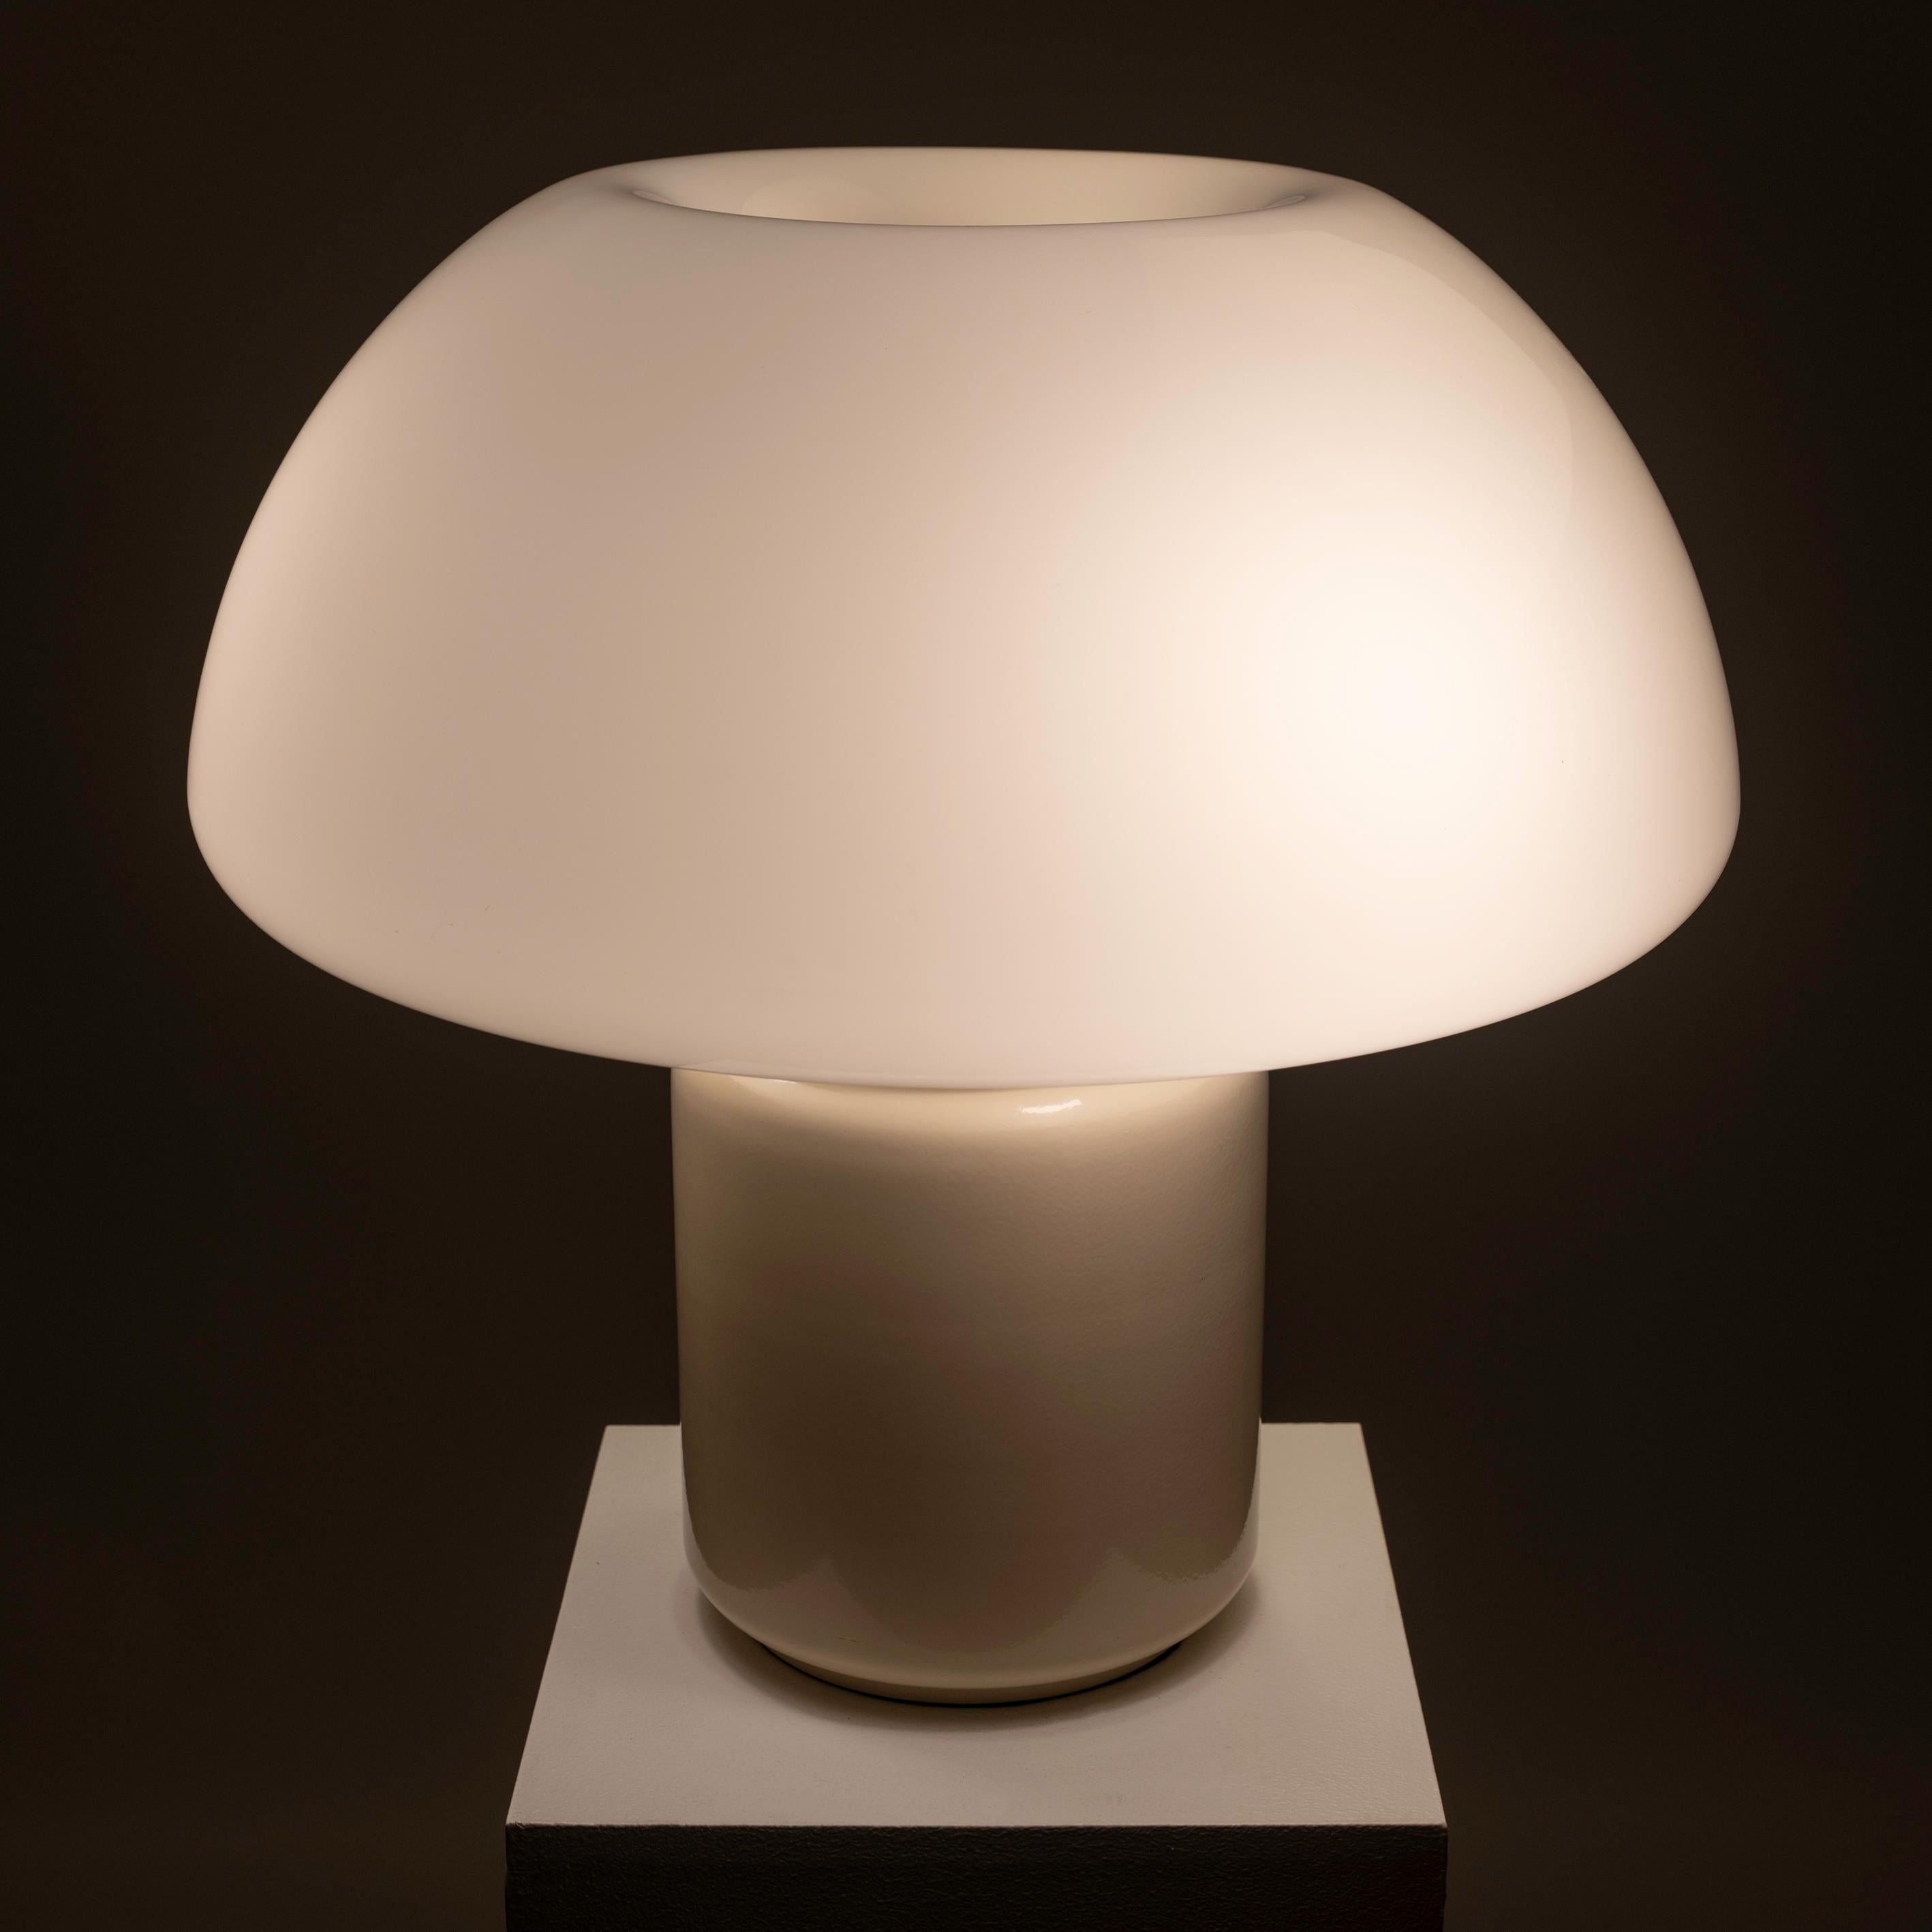 Space Age A magnificent mushroom Lamp by Elio Martinelli for Martinelli Luce, Italy 1970s